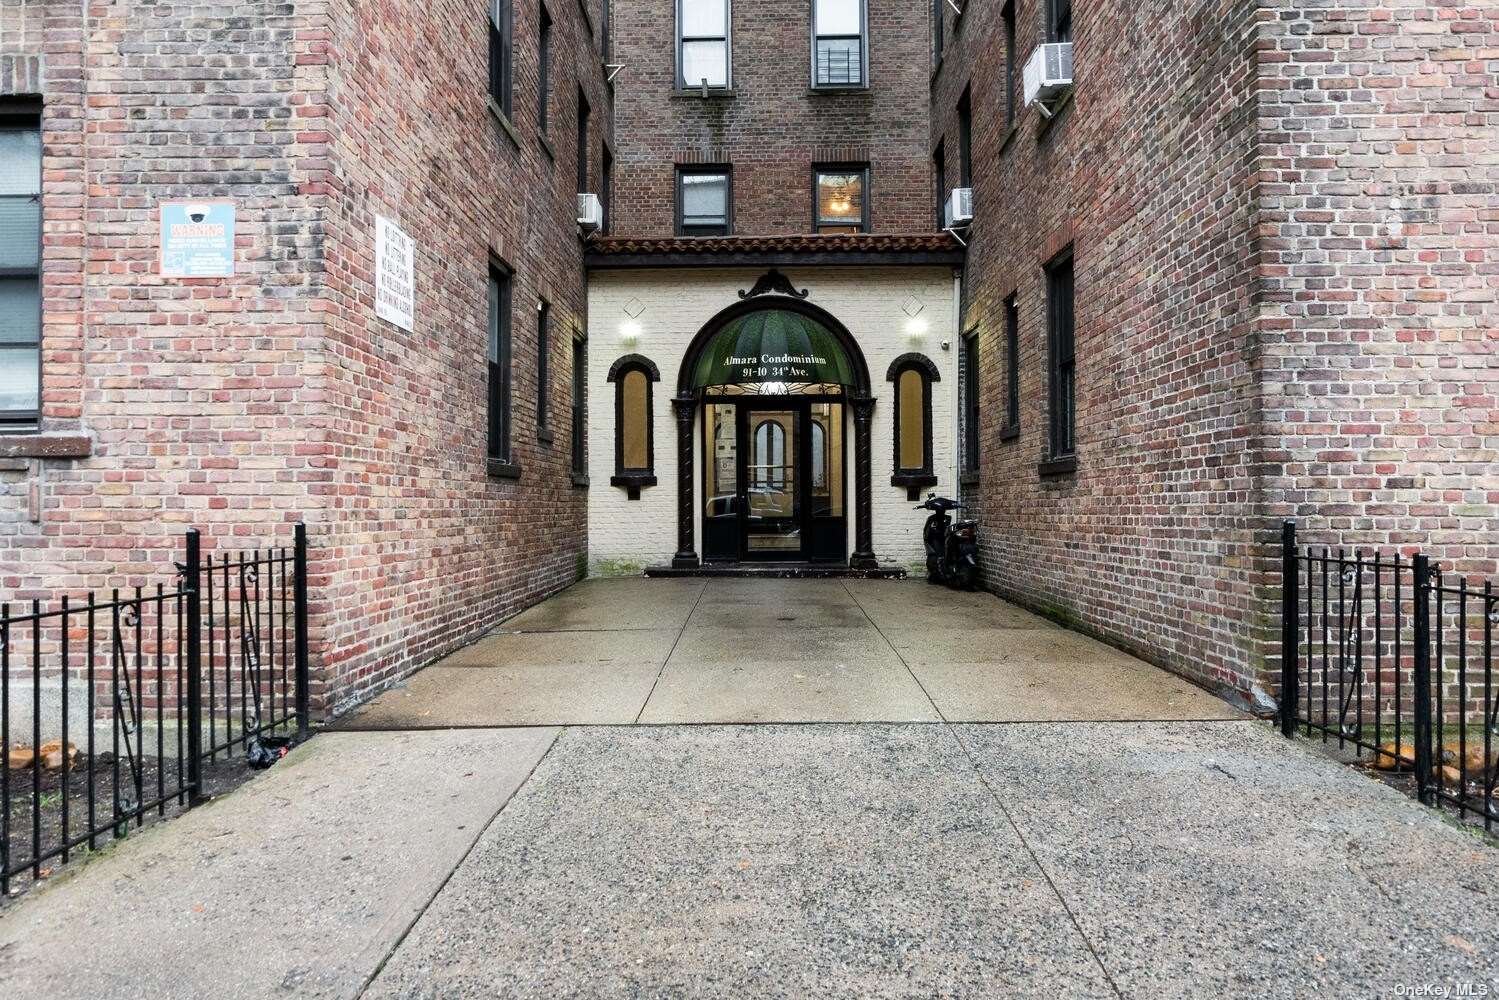 a view of entryway with brick walls